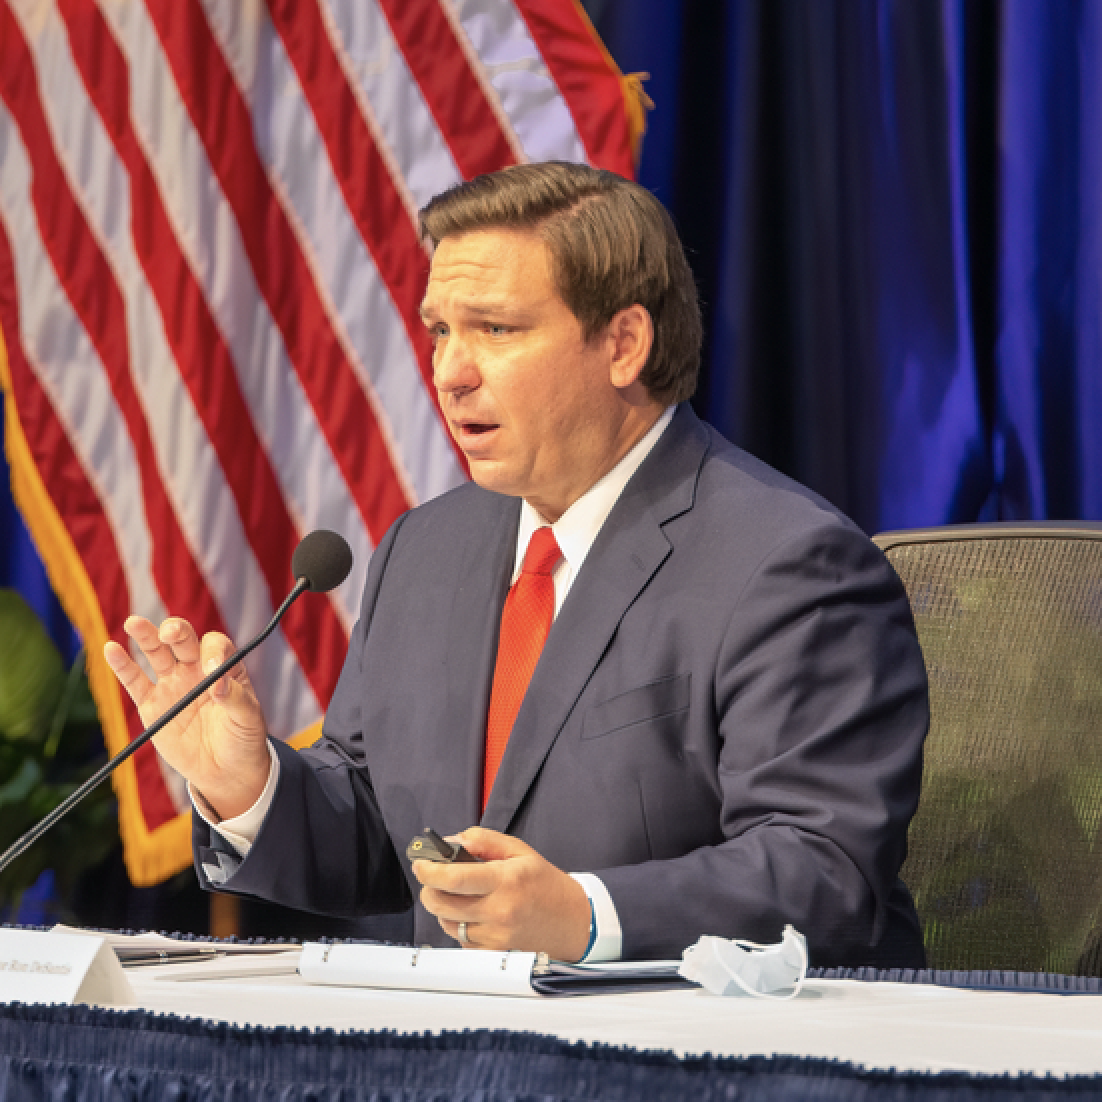 Families for Better Care COVID19 Governor DeSantis Image